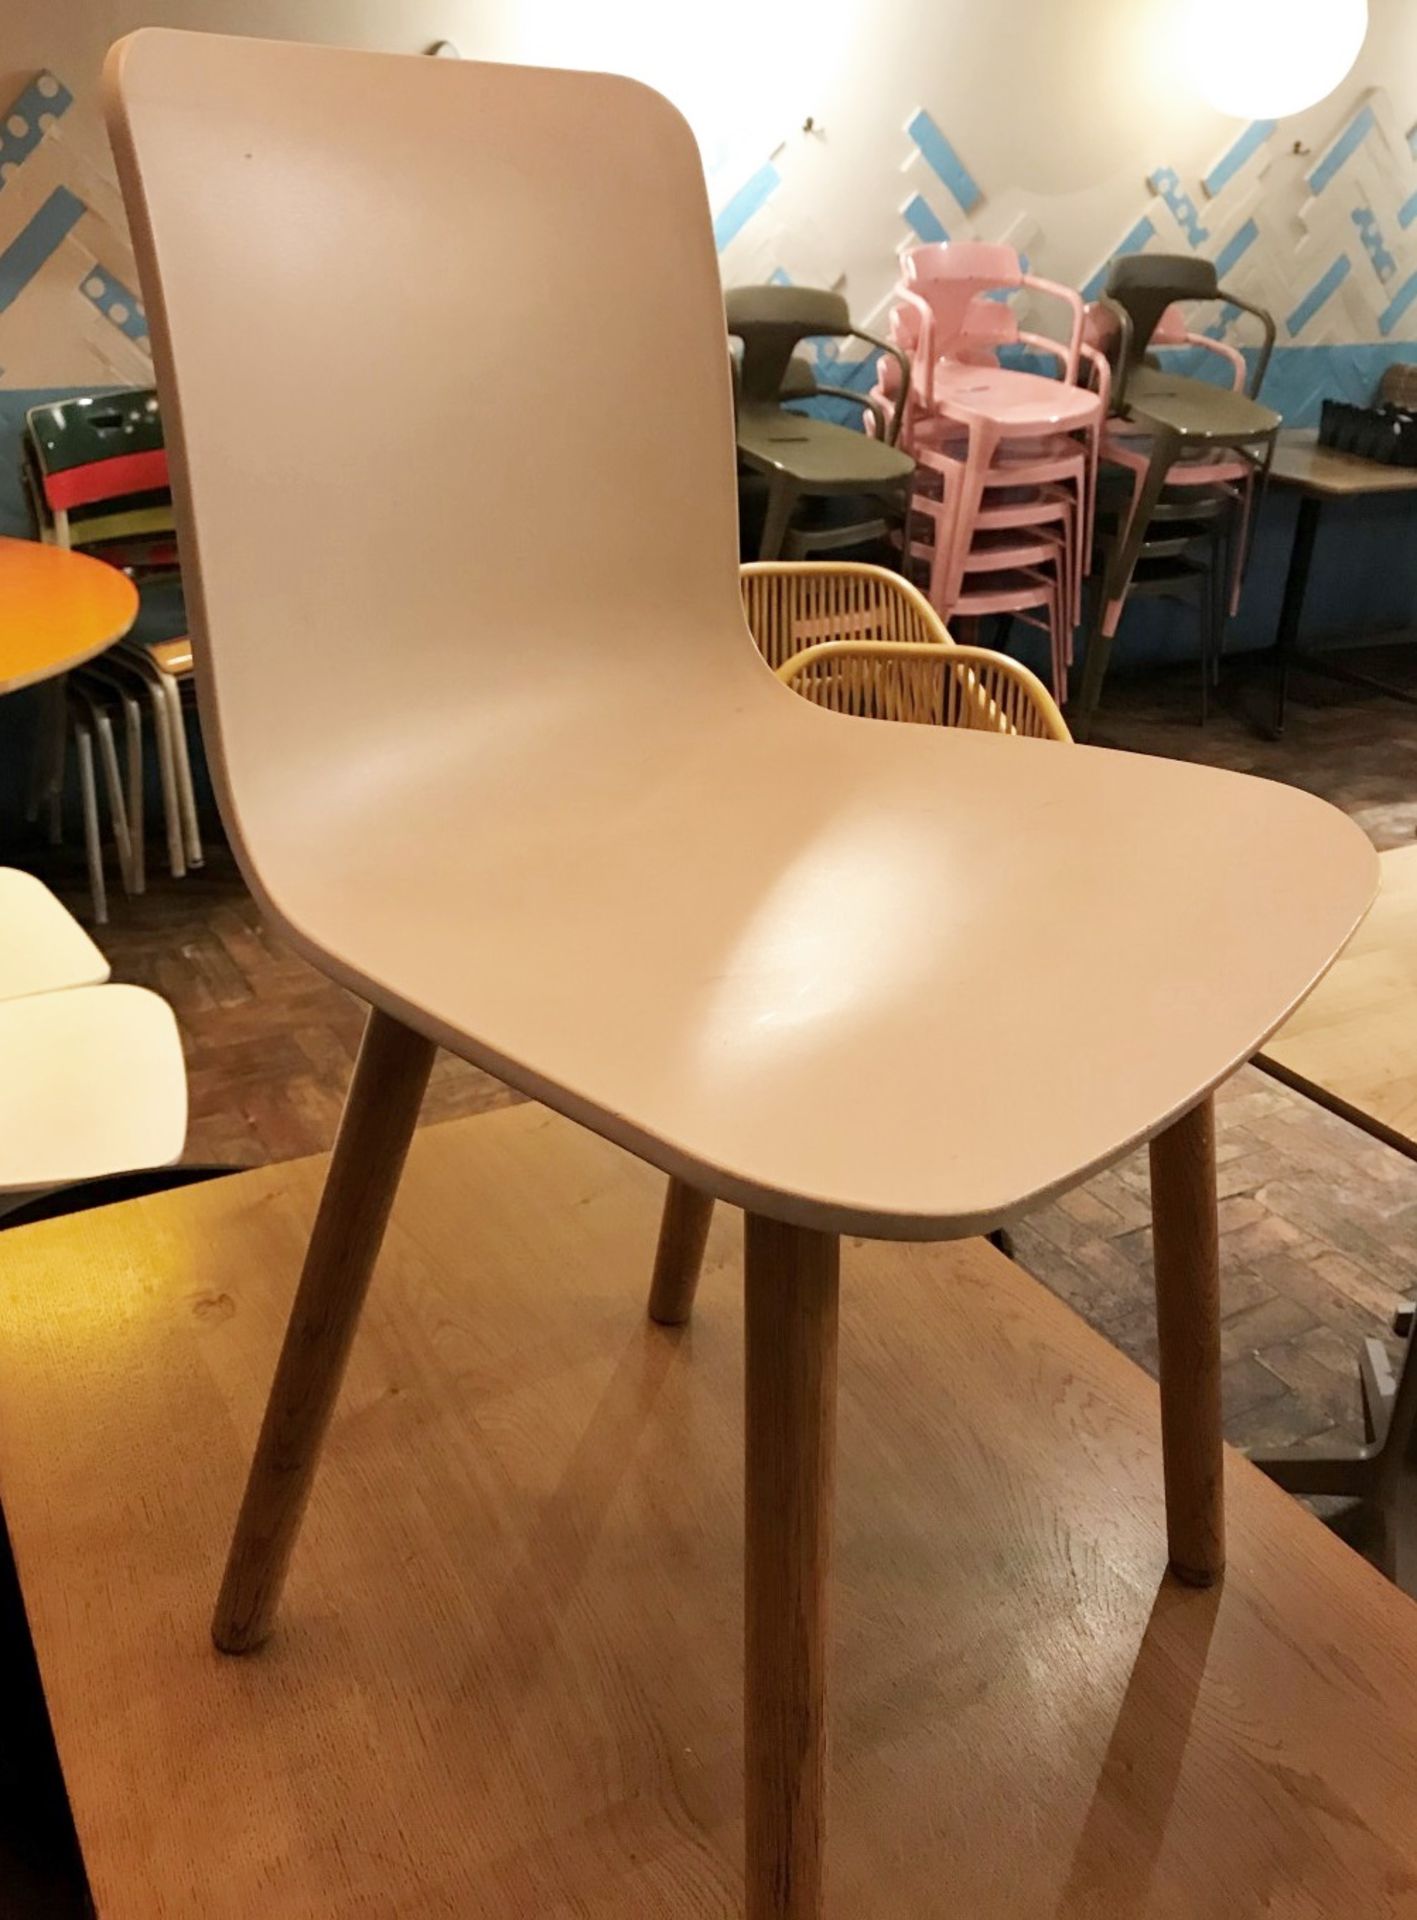 4 x Dining Chairs With Wooden Legs and White Seats - CL554 - Ref IM237 - Location: Altrincham WA14 - Image 2 of 2